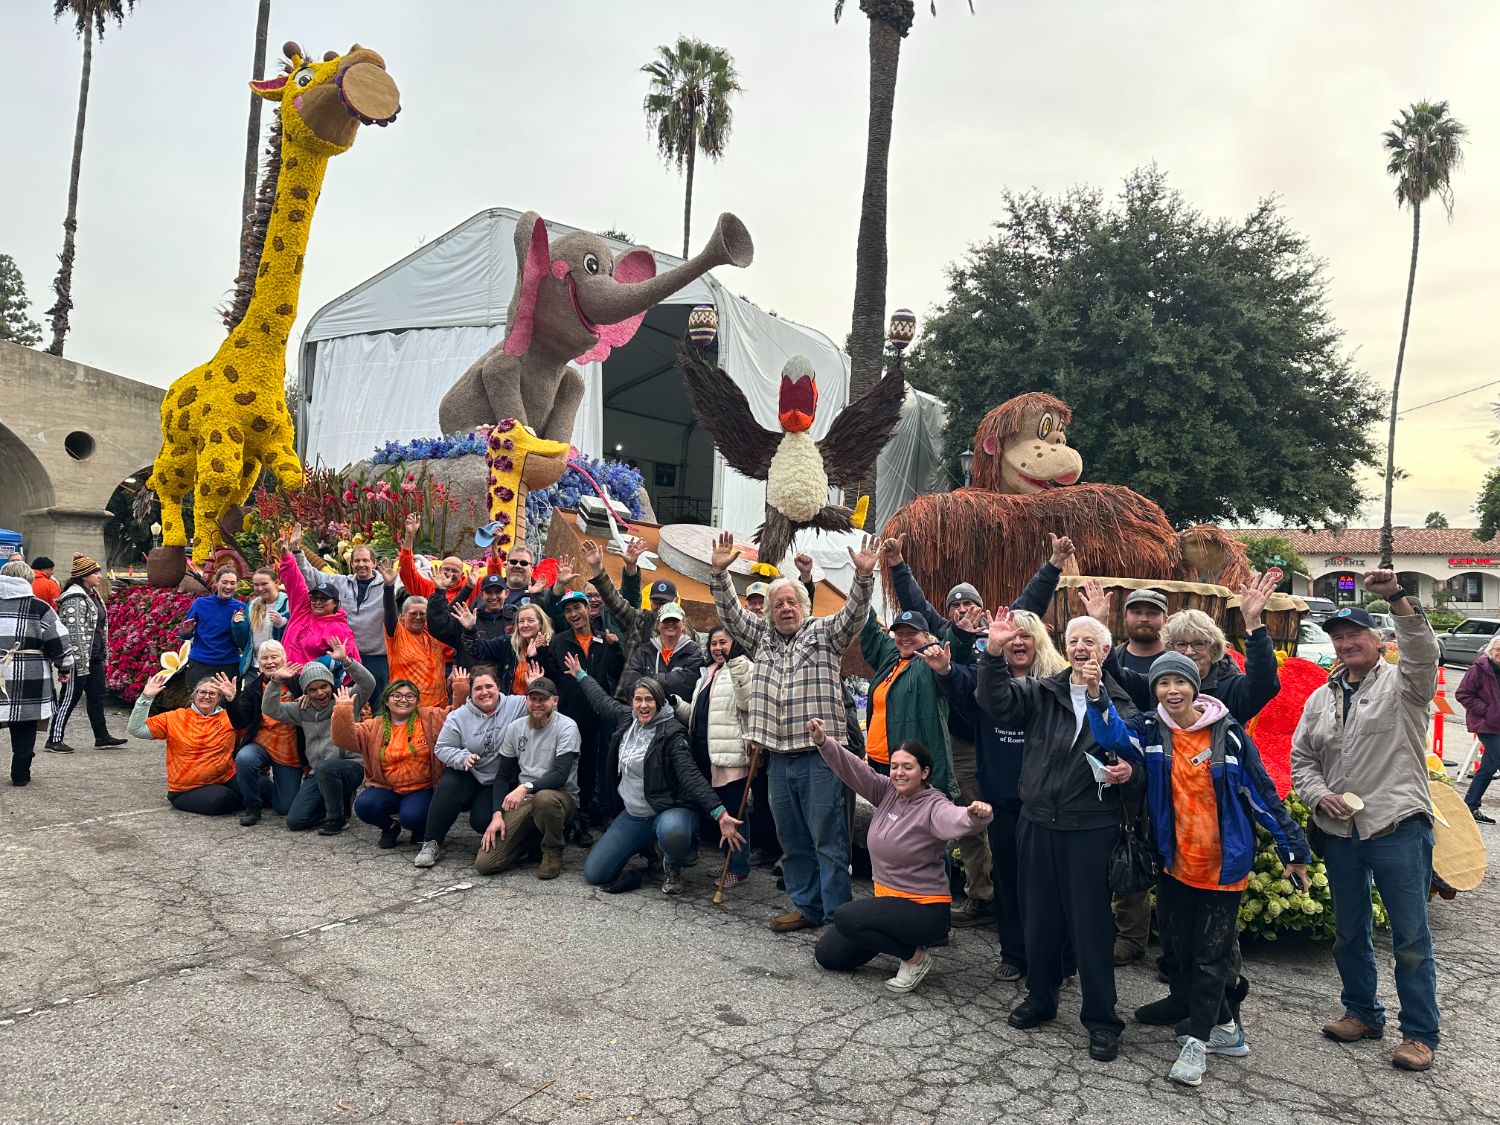 PHOTO: Bill Glazier | The South Pasadenan | South Pasadena Tournament of Roses 2024 float at the Tournament of Roses final judging on December 31, 2023.